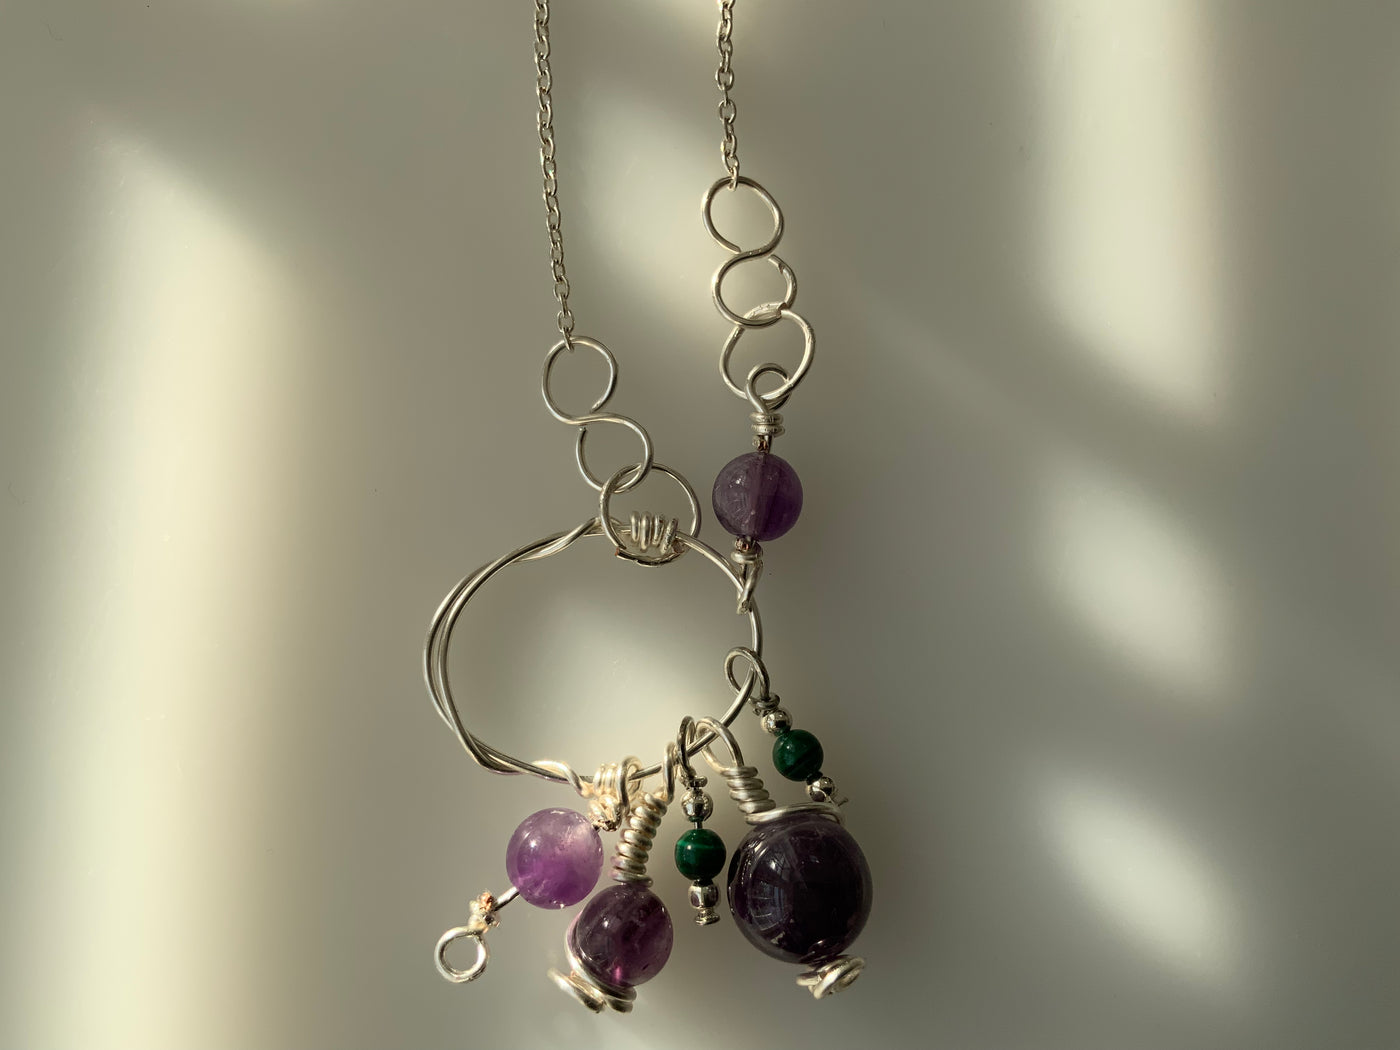 Pendant - Amethyst and  malachite on silver wire and chain for Shake and move collection.